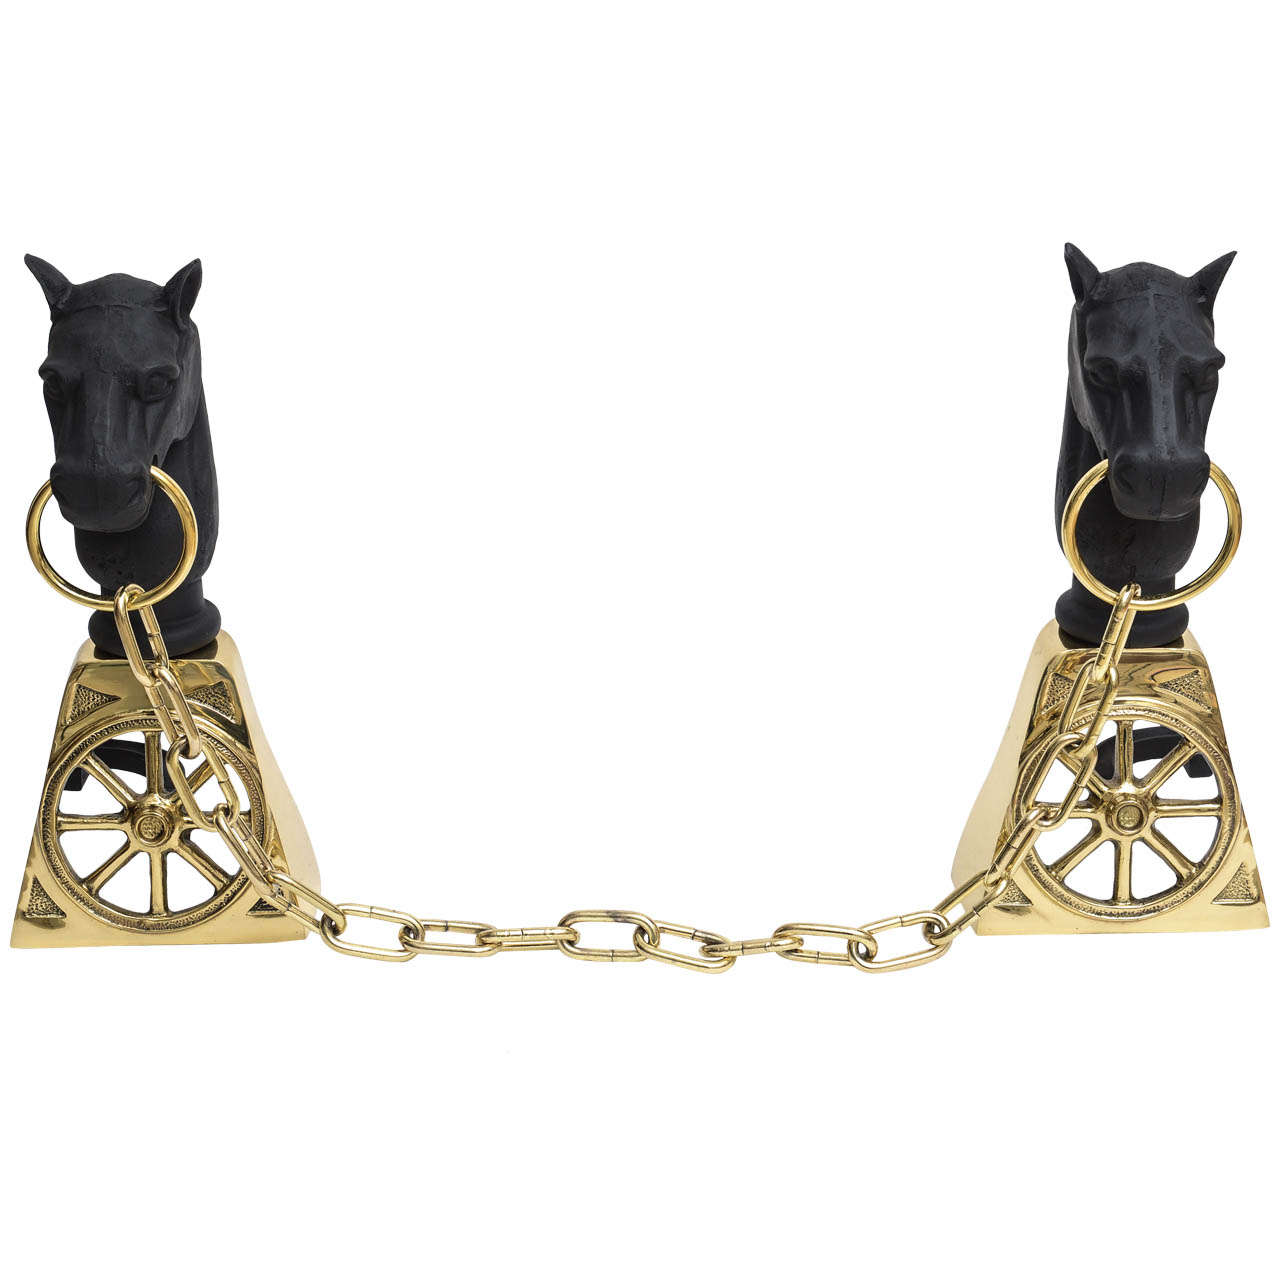  Fireplace Andirons with Horse Heads